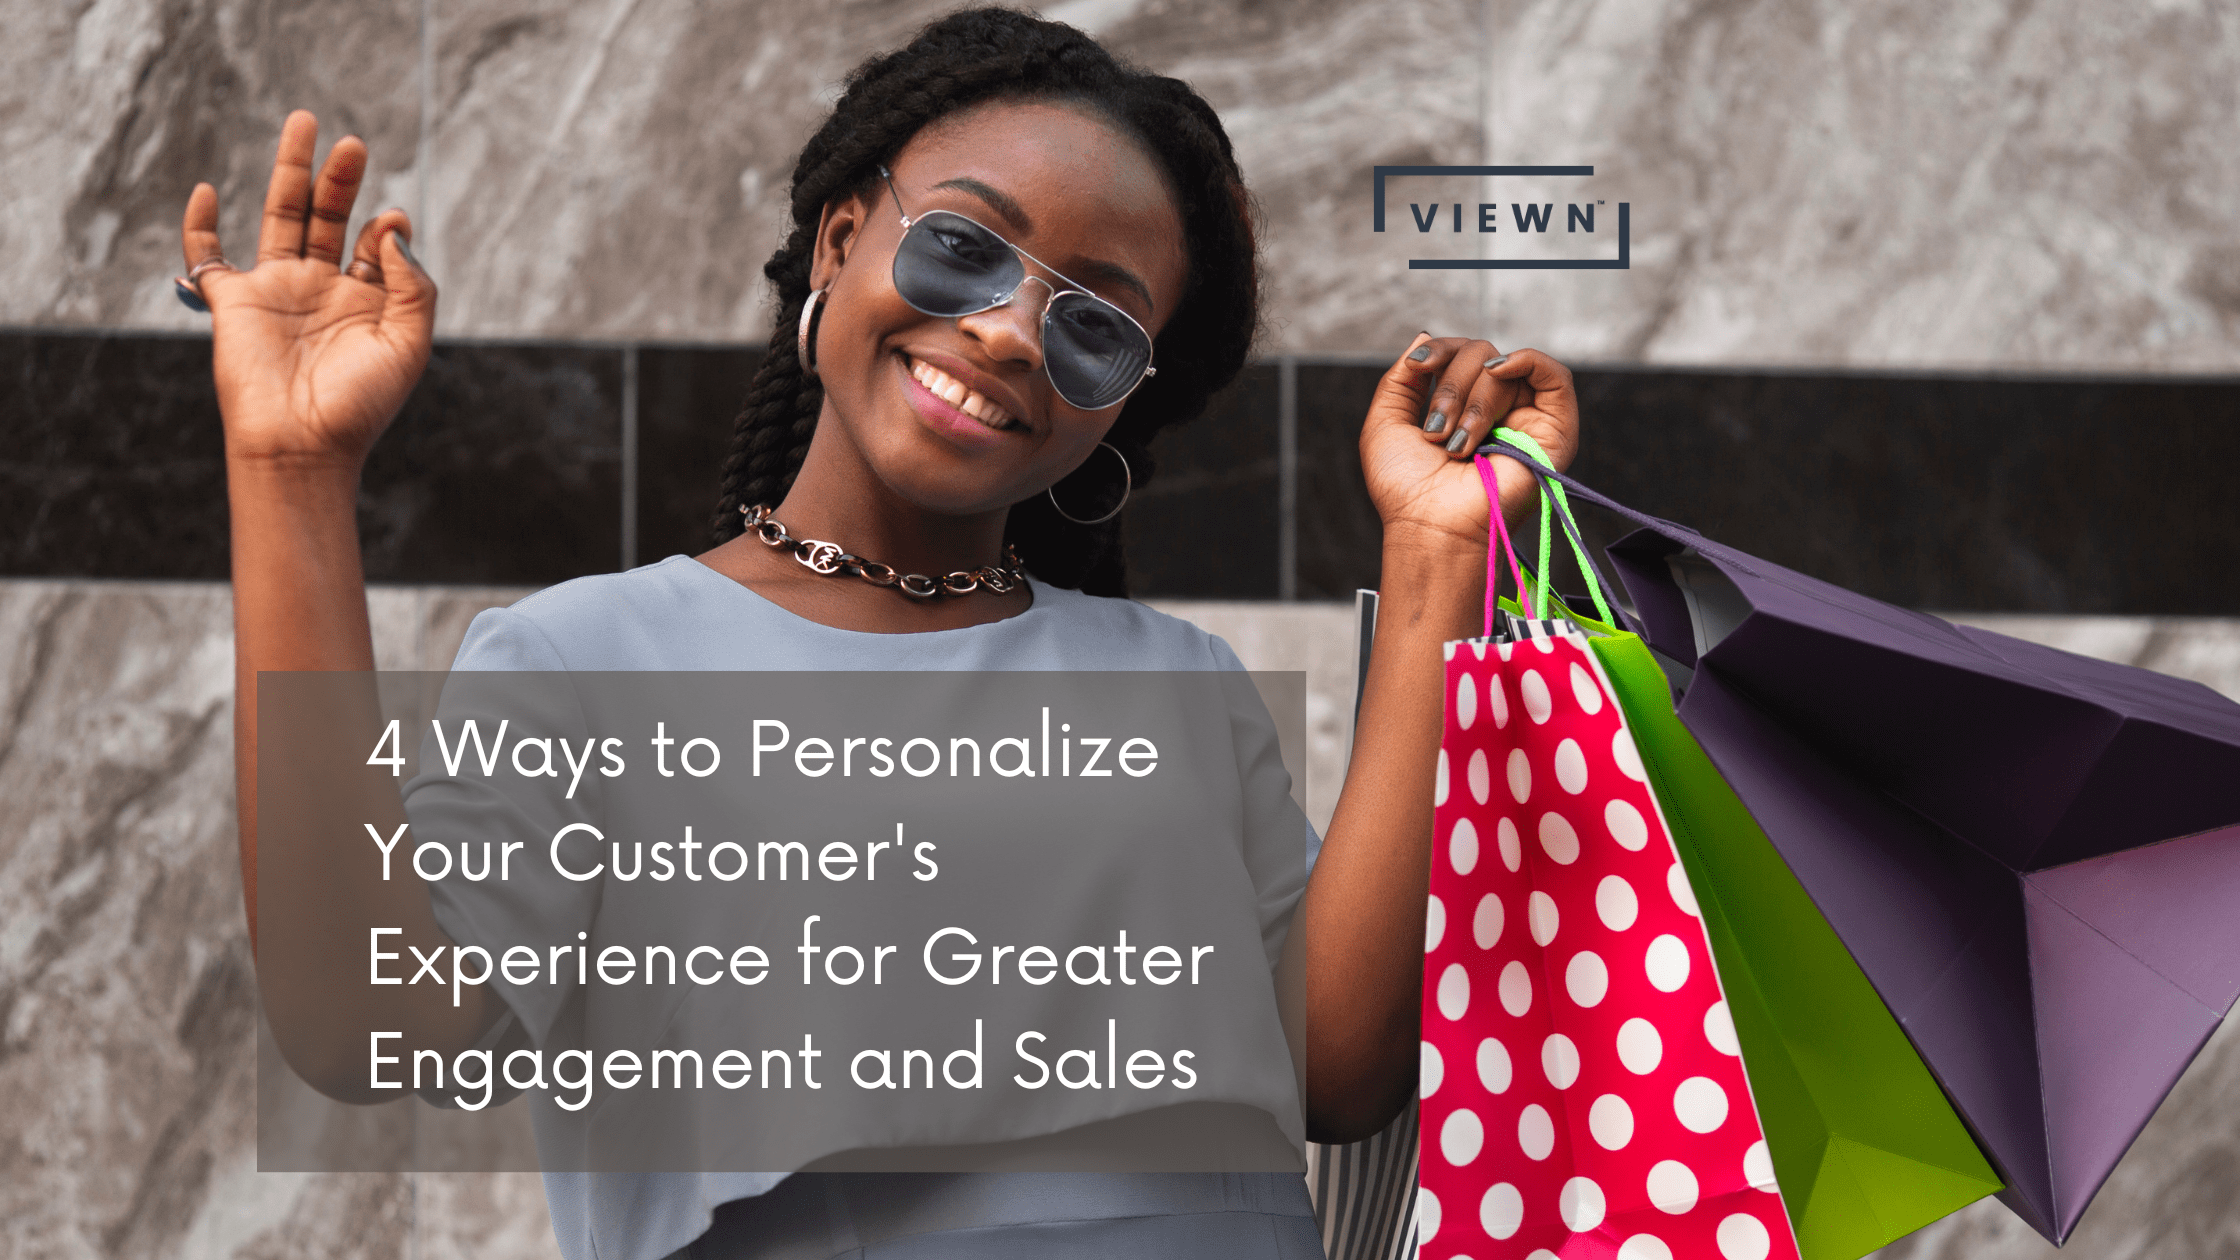 4 Ways to Personalize Your Customer's Experience for Greater Engagement and Sales